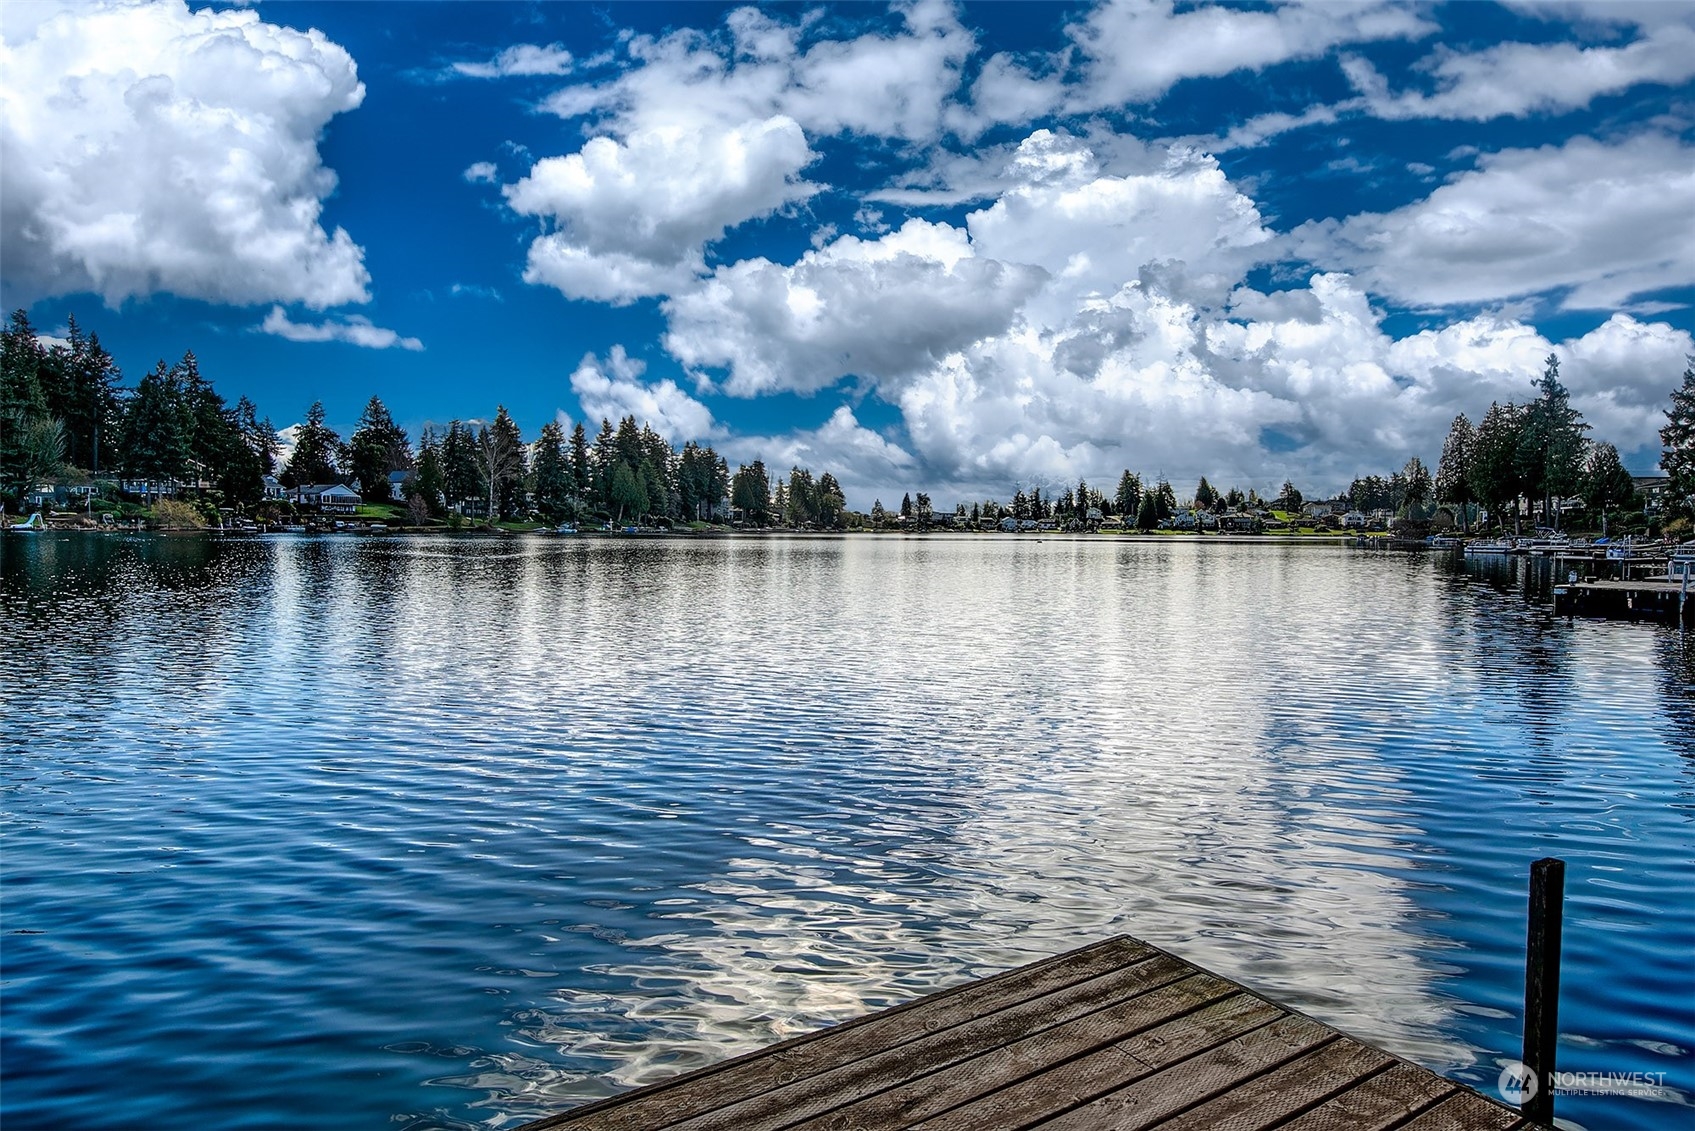 a view of a lake with houses